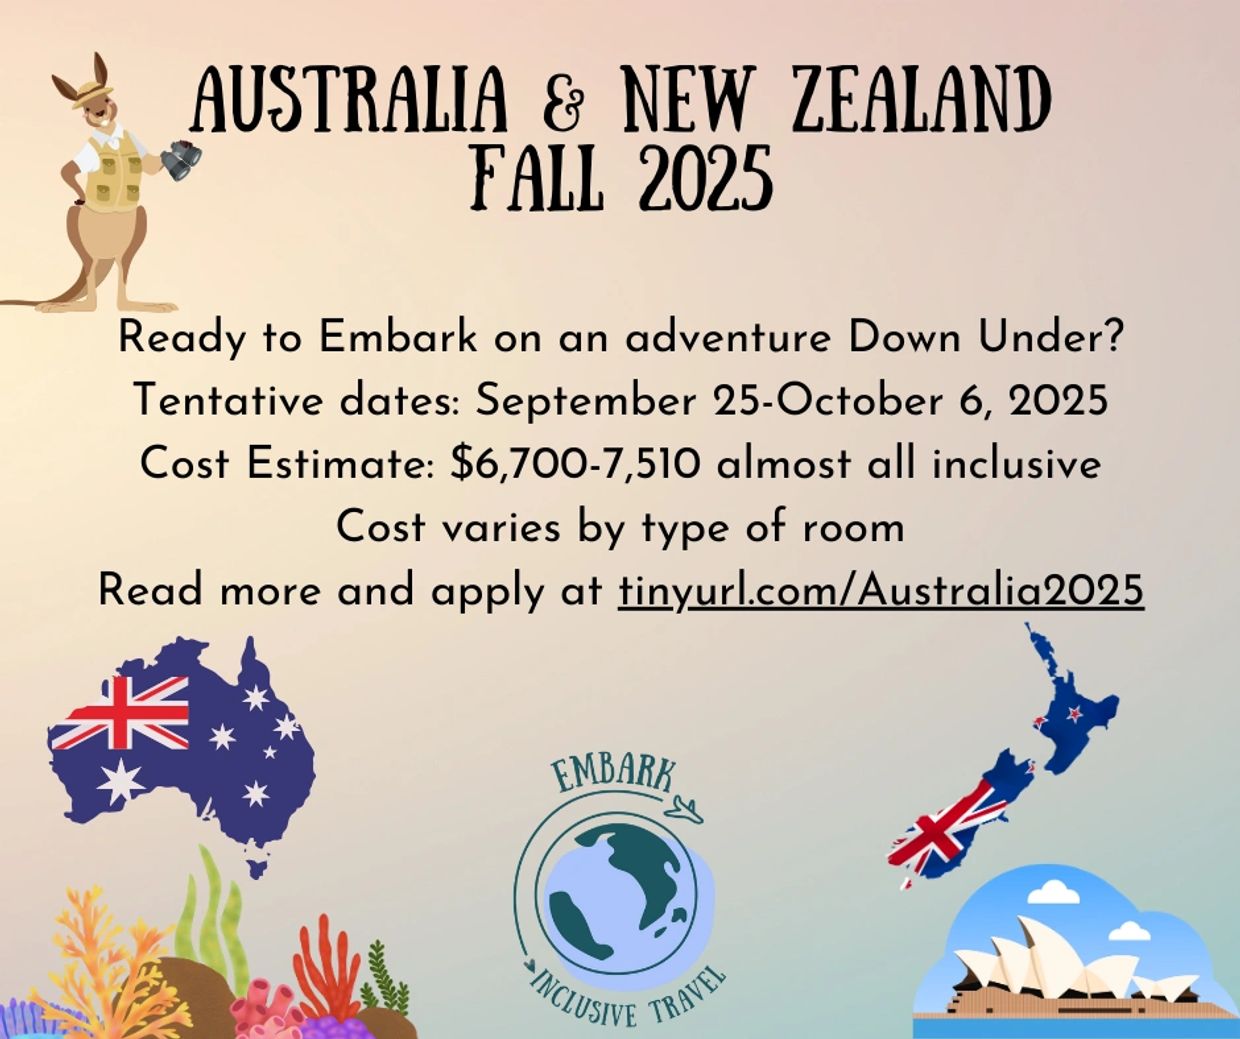 Australia and New Zealand September 25-October 6, 2025
Cost Estimate: $6,700-7,510 almost all inclus